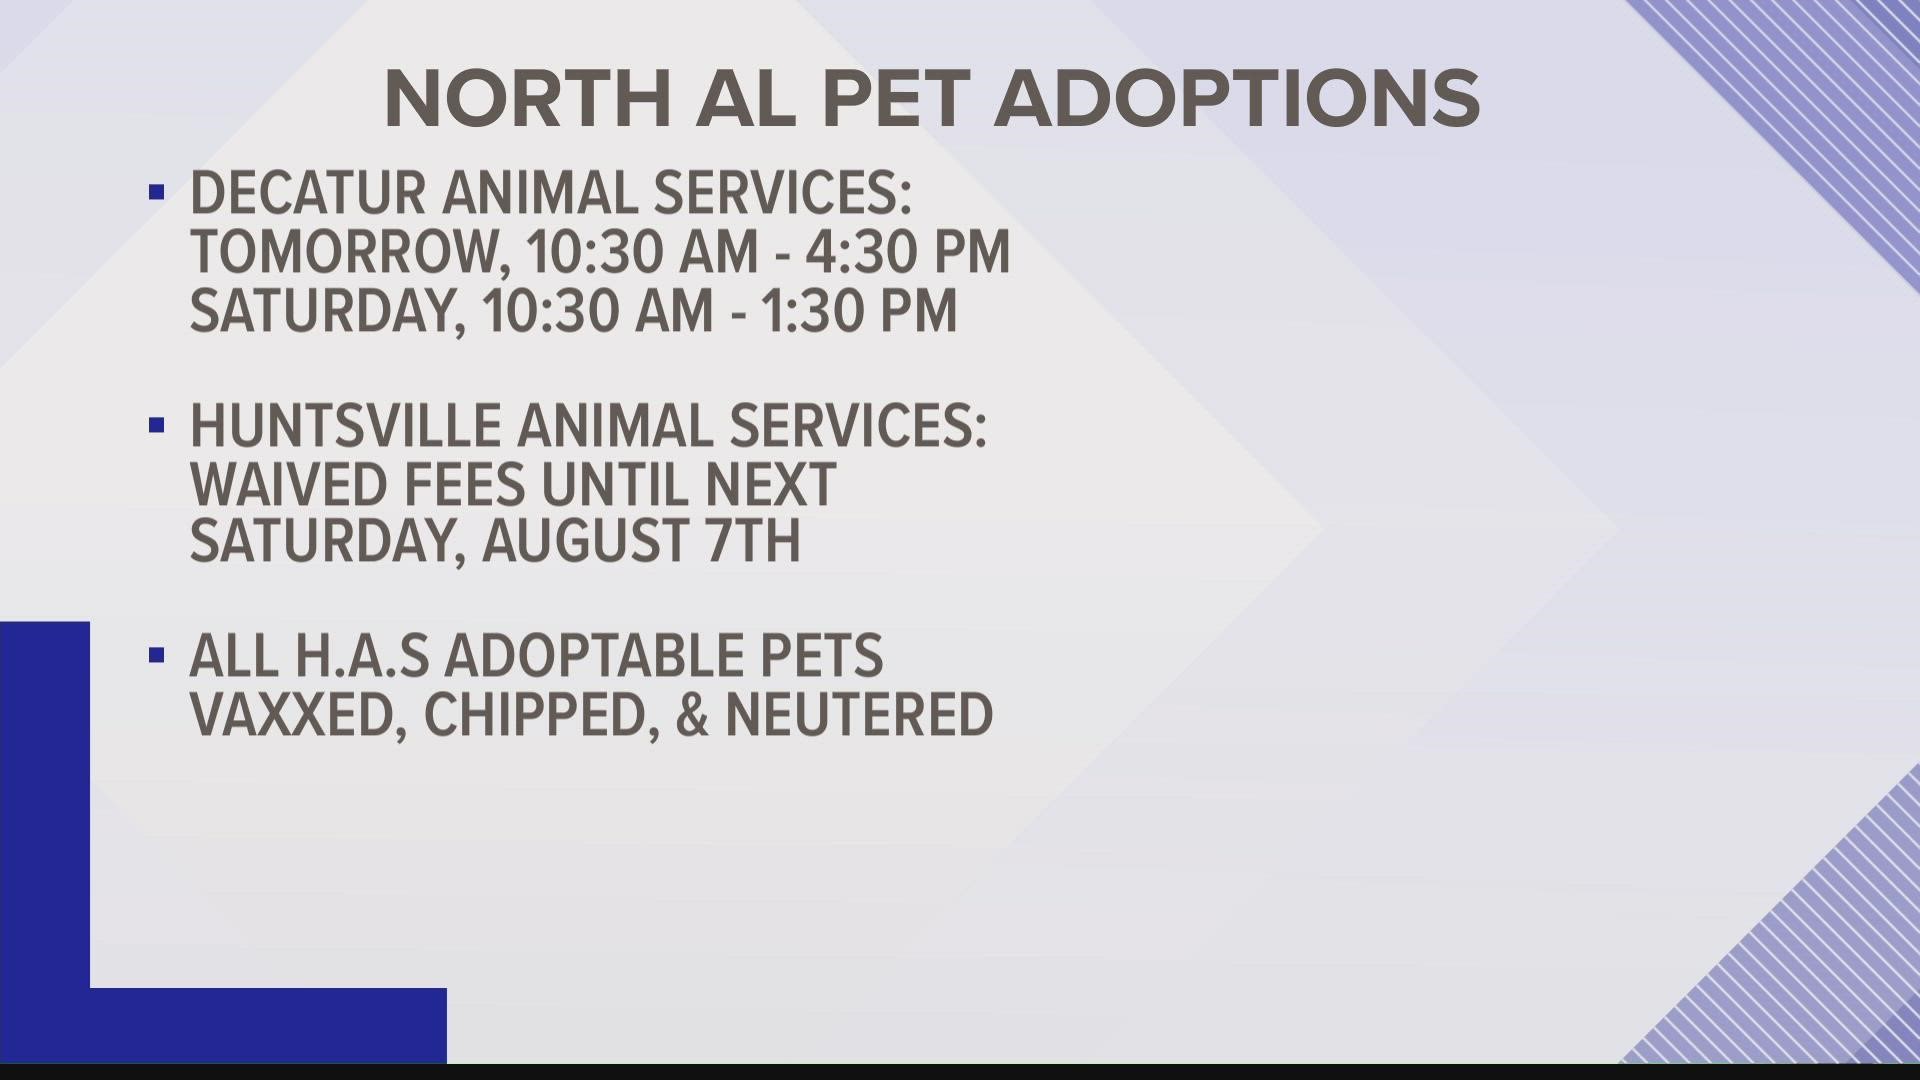 Decatur Animal Services will offer free animal adoptions starting tomorrow from 10:30 am to 4:30 pm and Saturday from 10:30 am to 1:30 pm.